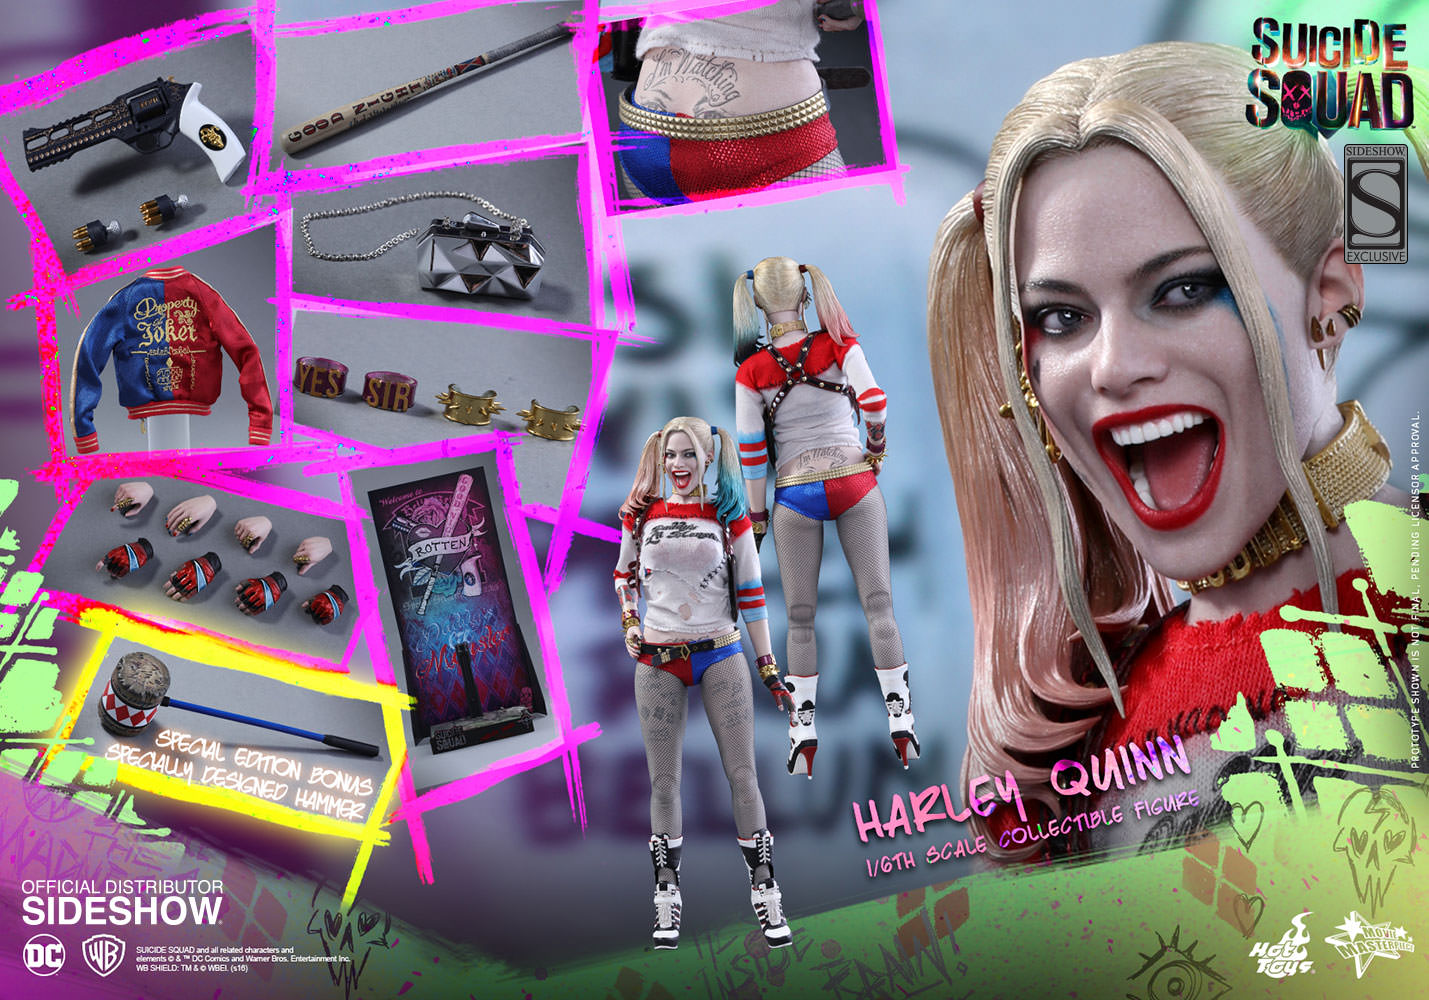 dc-comics-harley-quinn-sixth-scale-suicide-squad-9027751-01.jpg